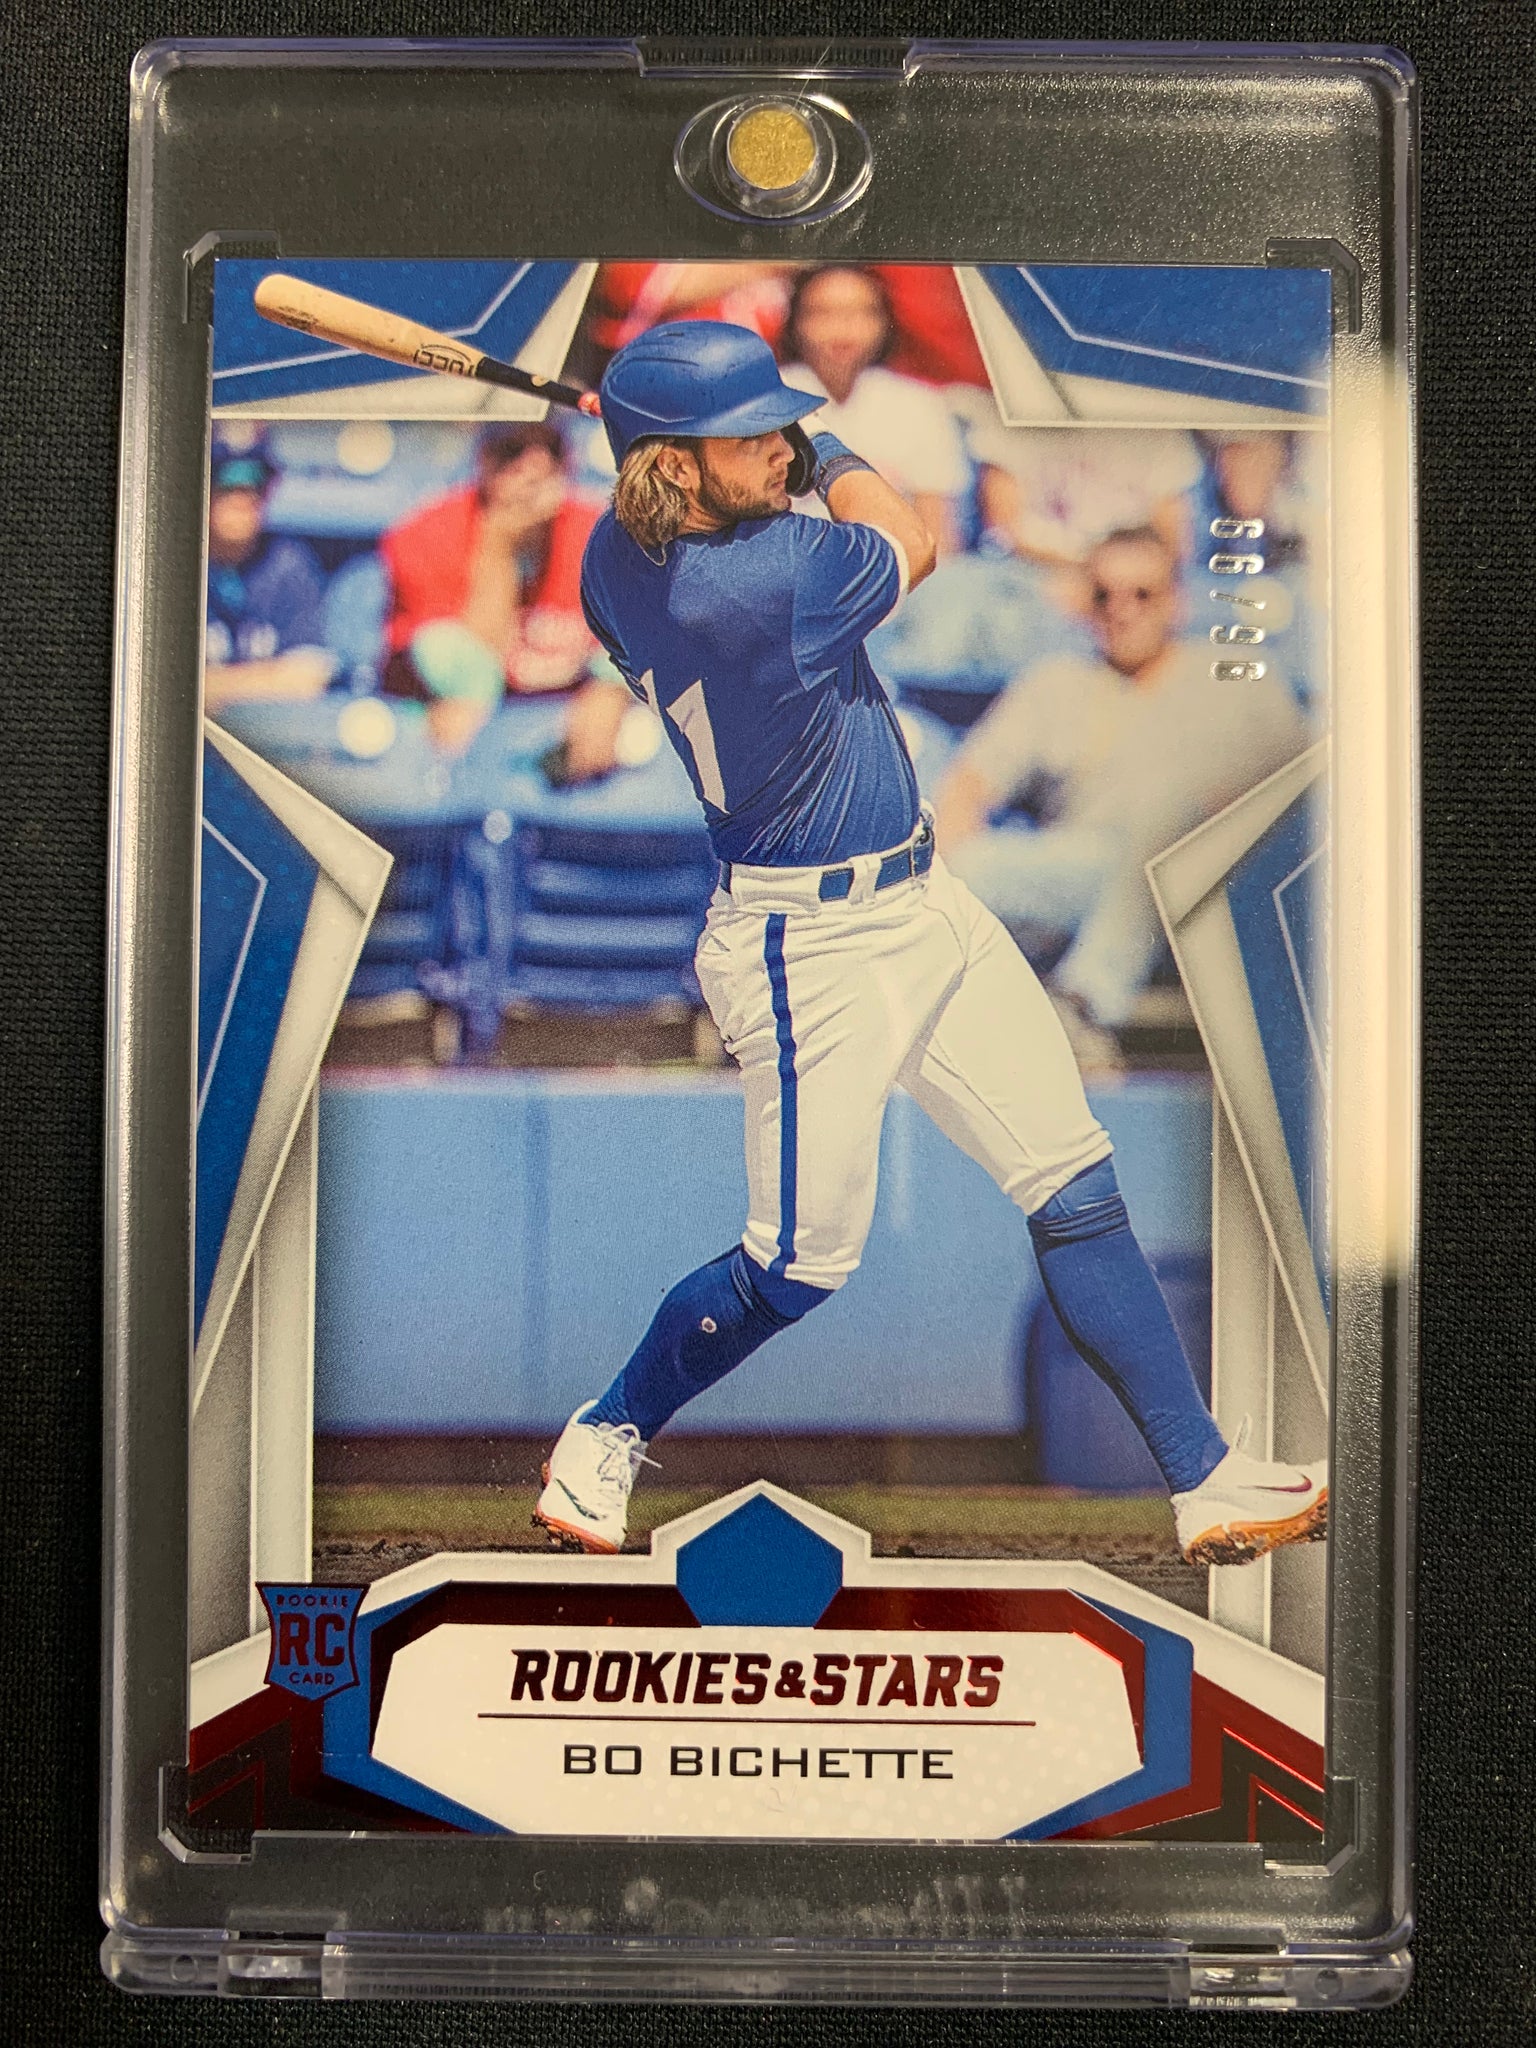 2020 PANINI CHRONICLES ROOKIES & STARS #3 TORONTO BLUE JAYS - BO BICHETTE RED PARALLEL ROOKIE CARD NUMBERED 96/99